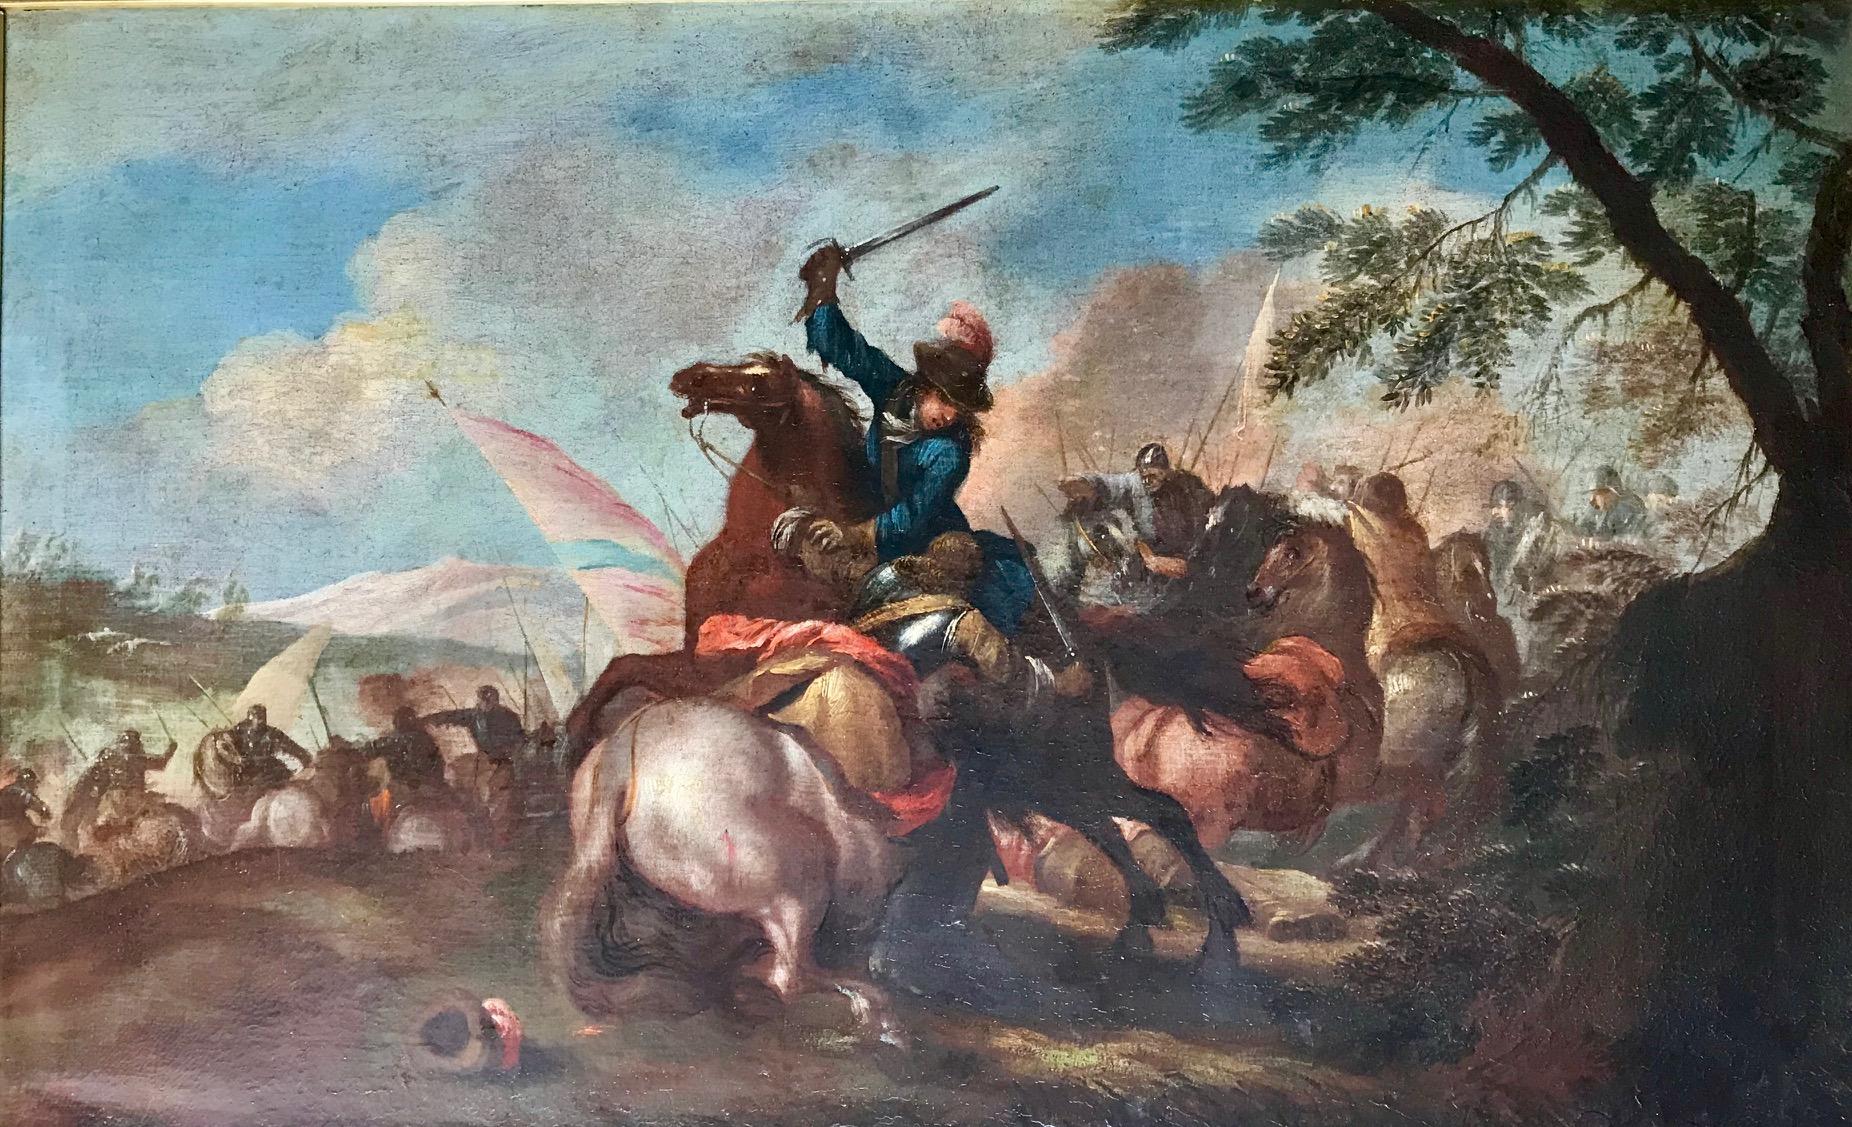 Italian old master painting 17th century attr. Ilario Spolverini, 1657-1734.

This painting in oil on canvas represents a battle scene involving Turkish and Christian cavalry. Ilario Spolverini was the most important artist of Battalistic genre